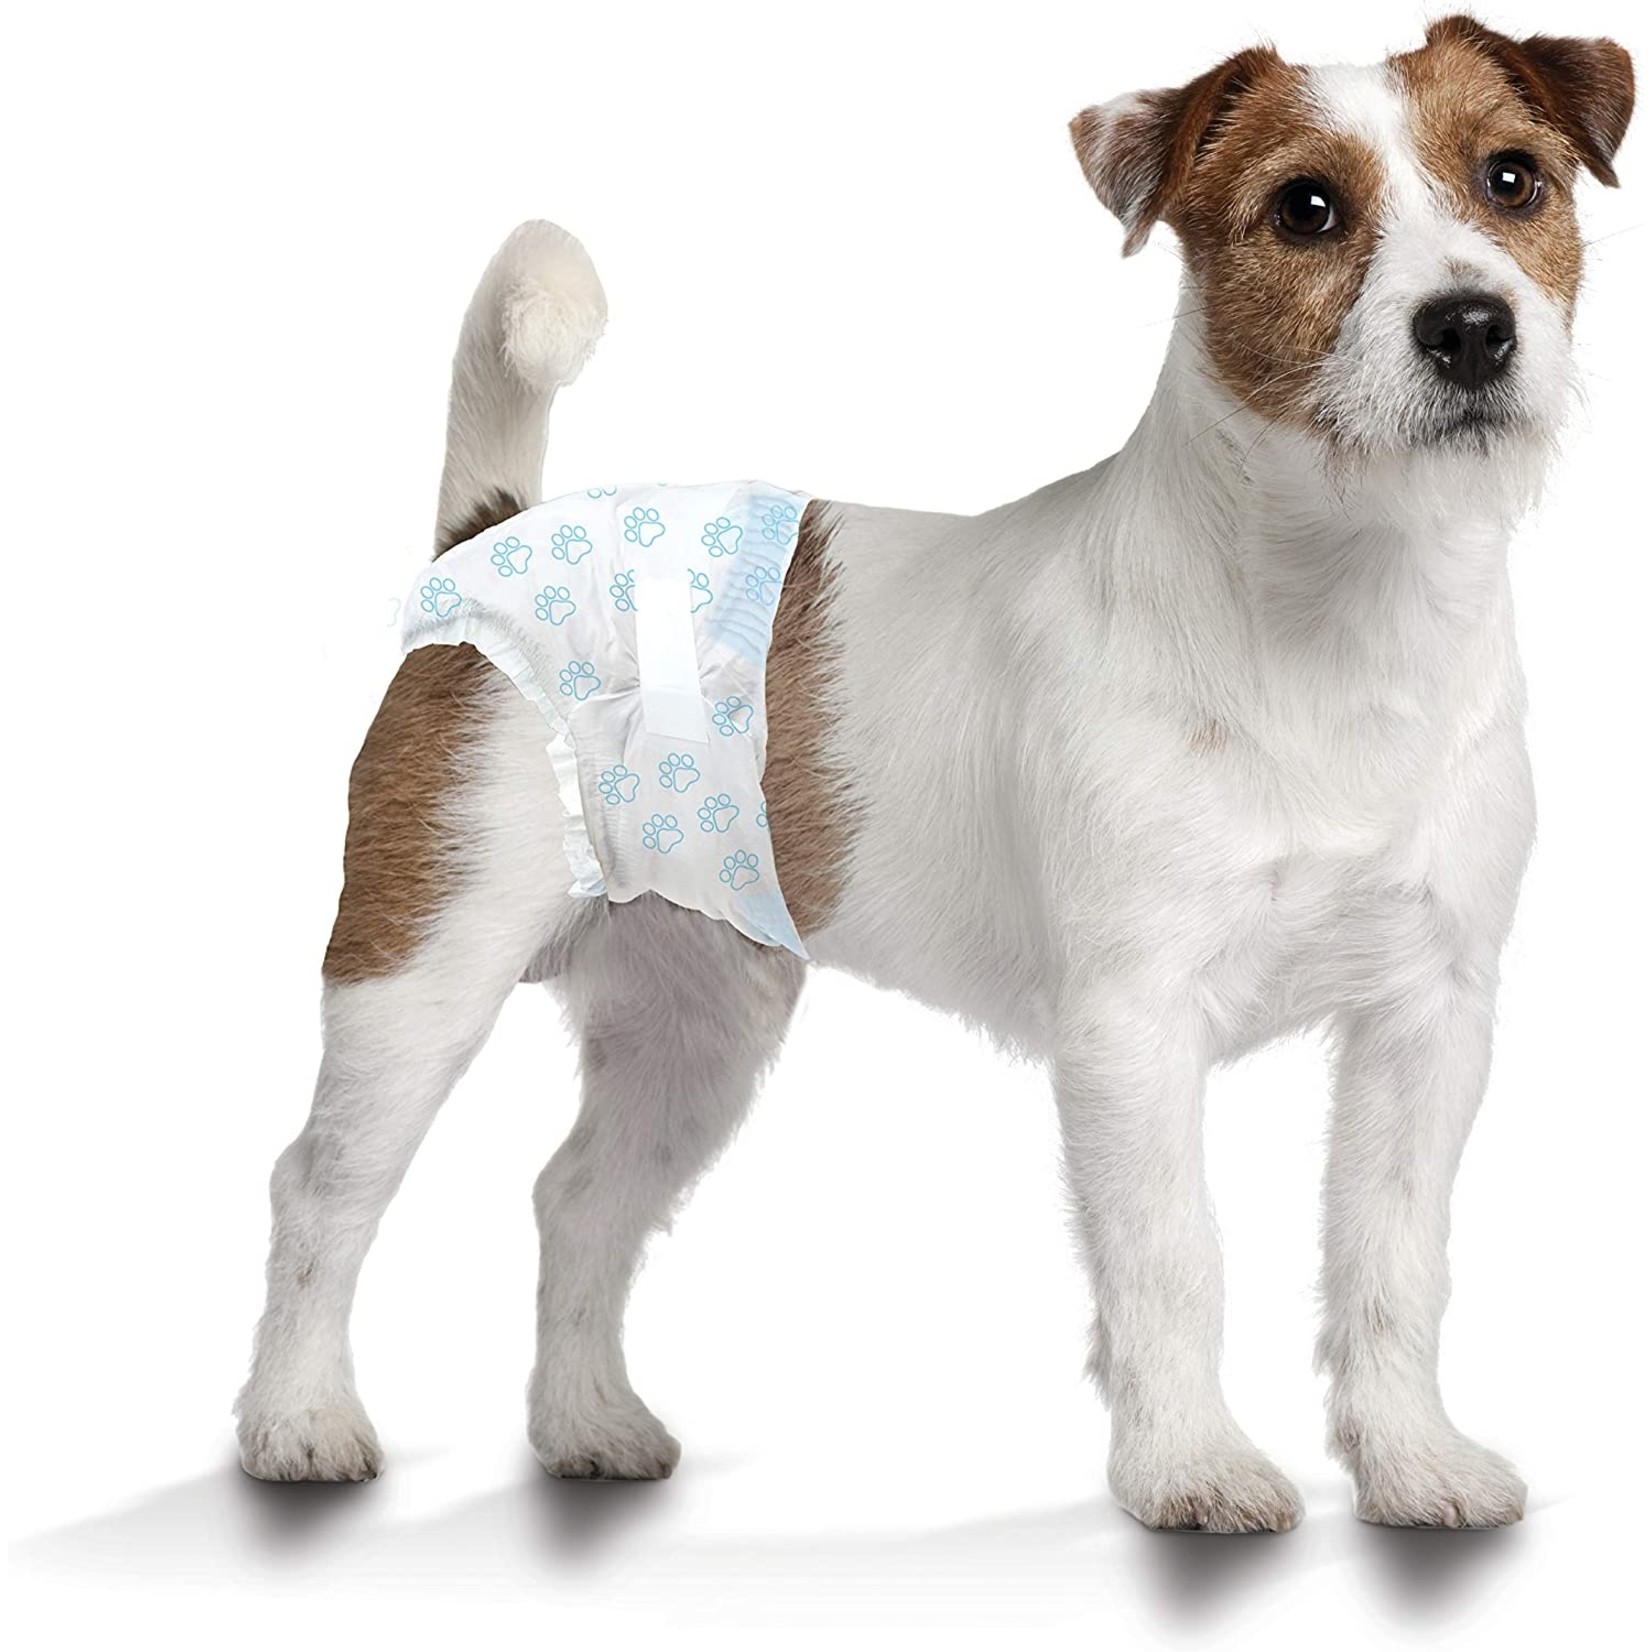 Four Paws Four Paws Wee Wee Diaper 12hr Small 12 count